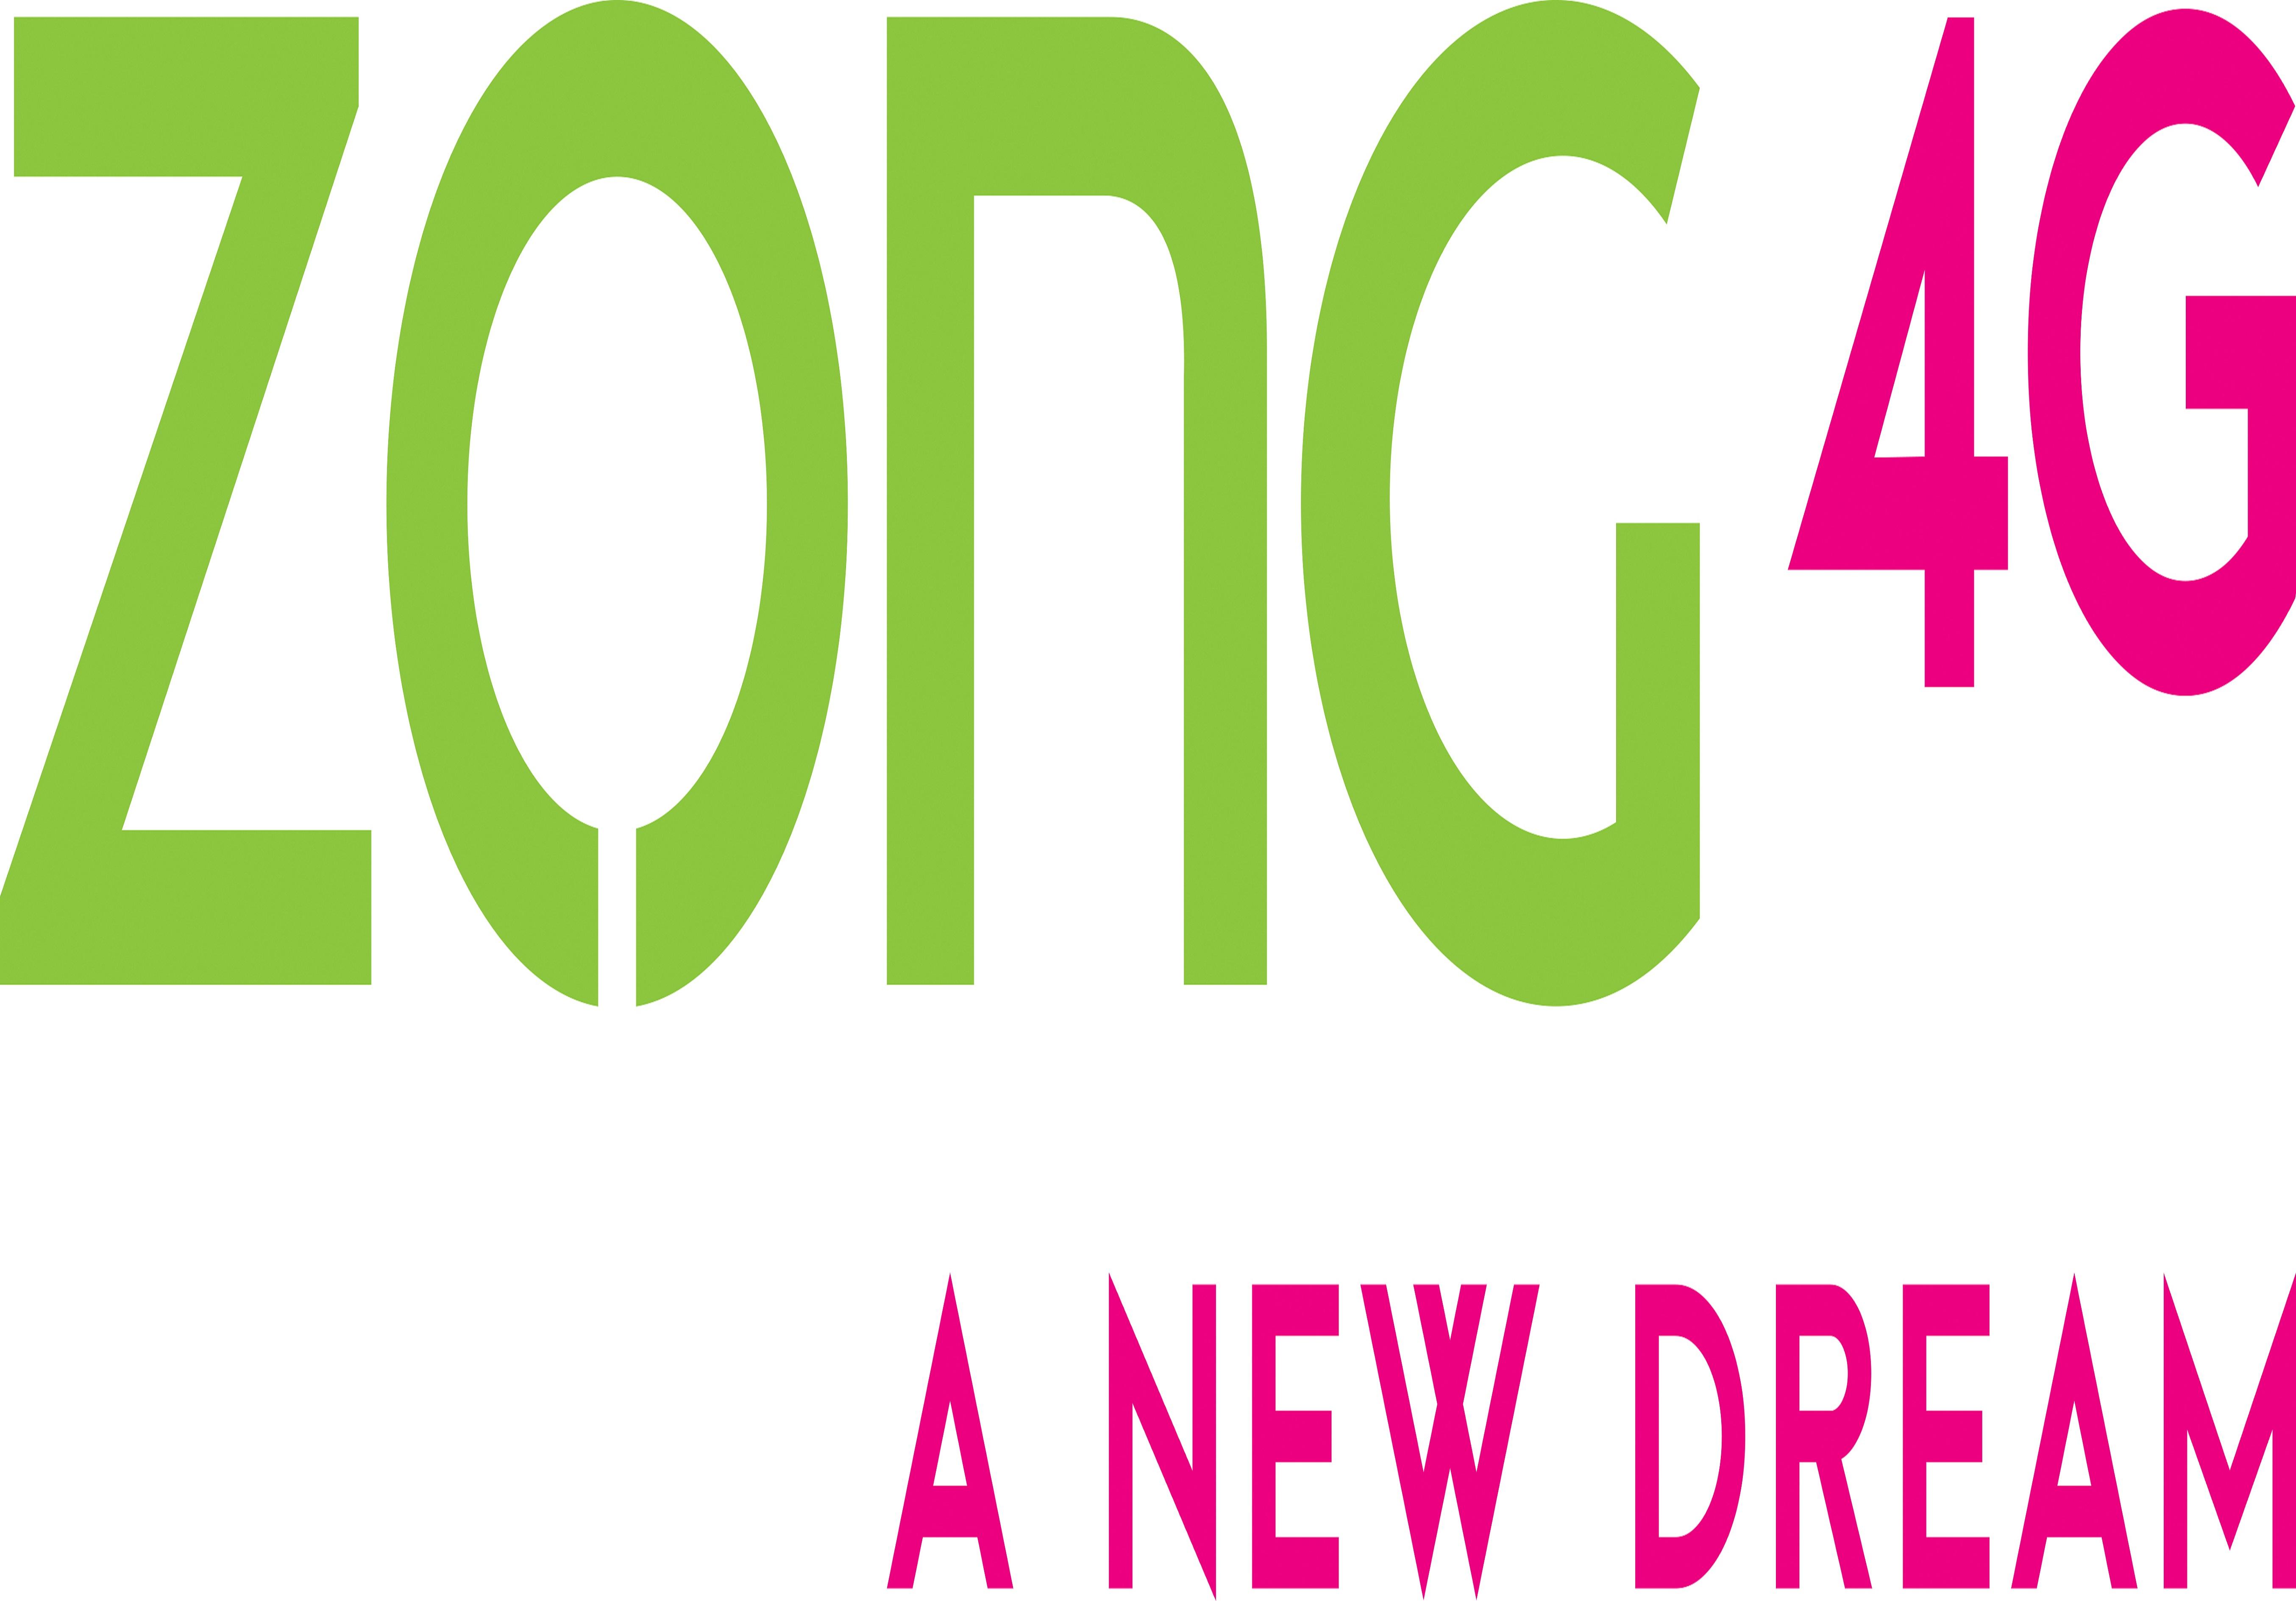 ZonG 4G offers the widest 4G International Roaming Services for its customers